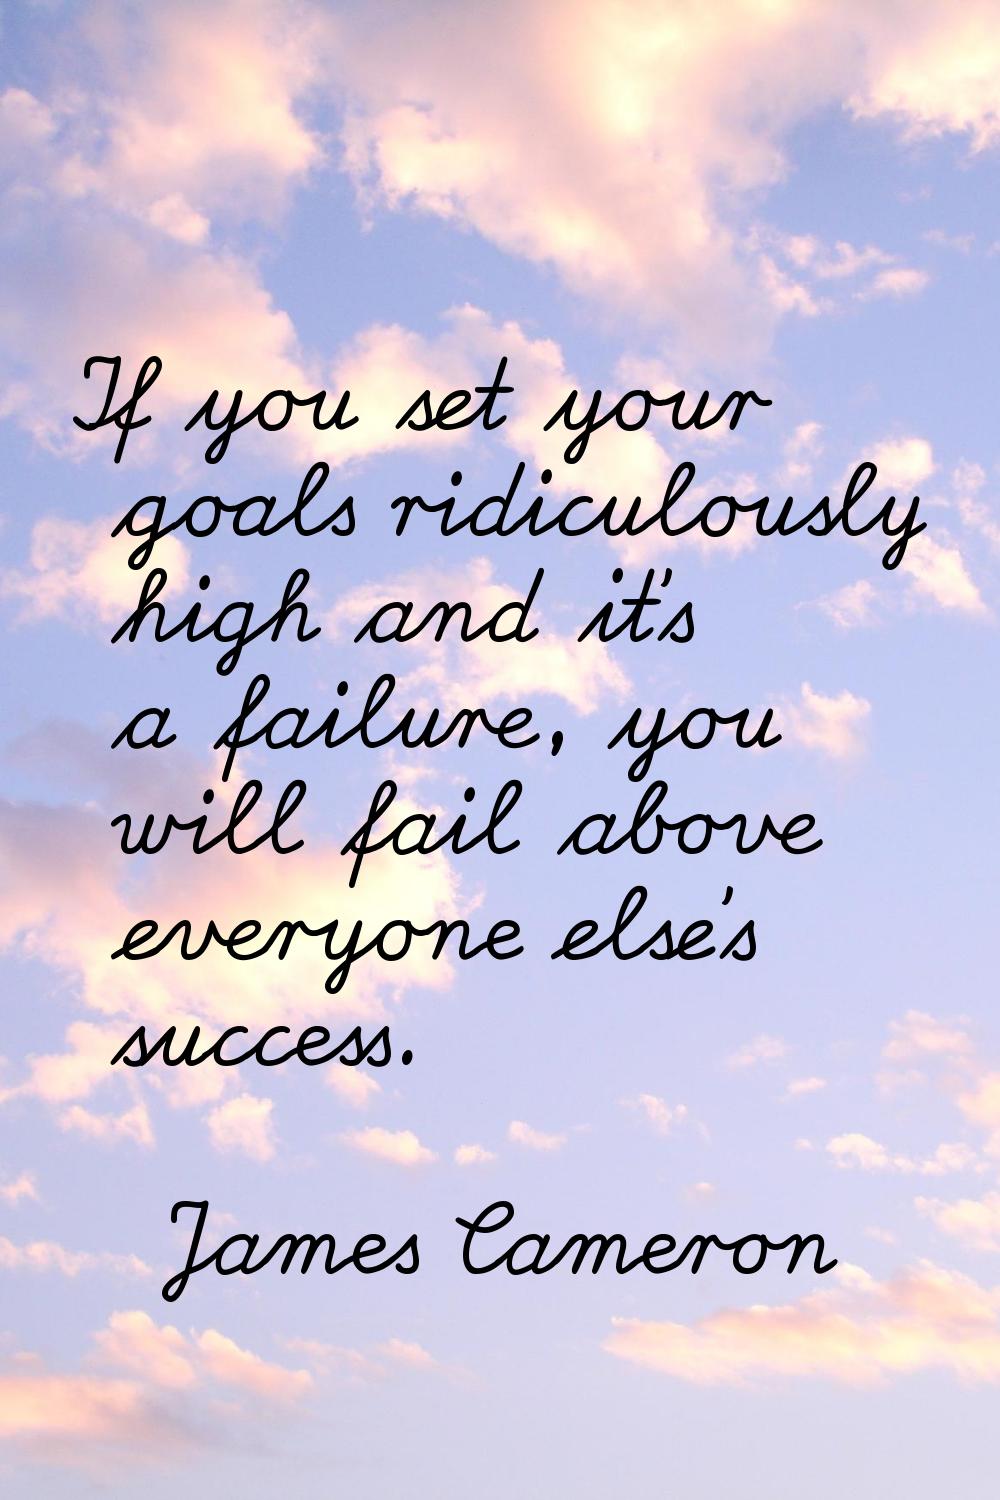 If you set your goals ridiculously high and it's a failure, you will fail above everyone else's suc